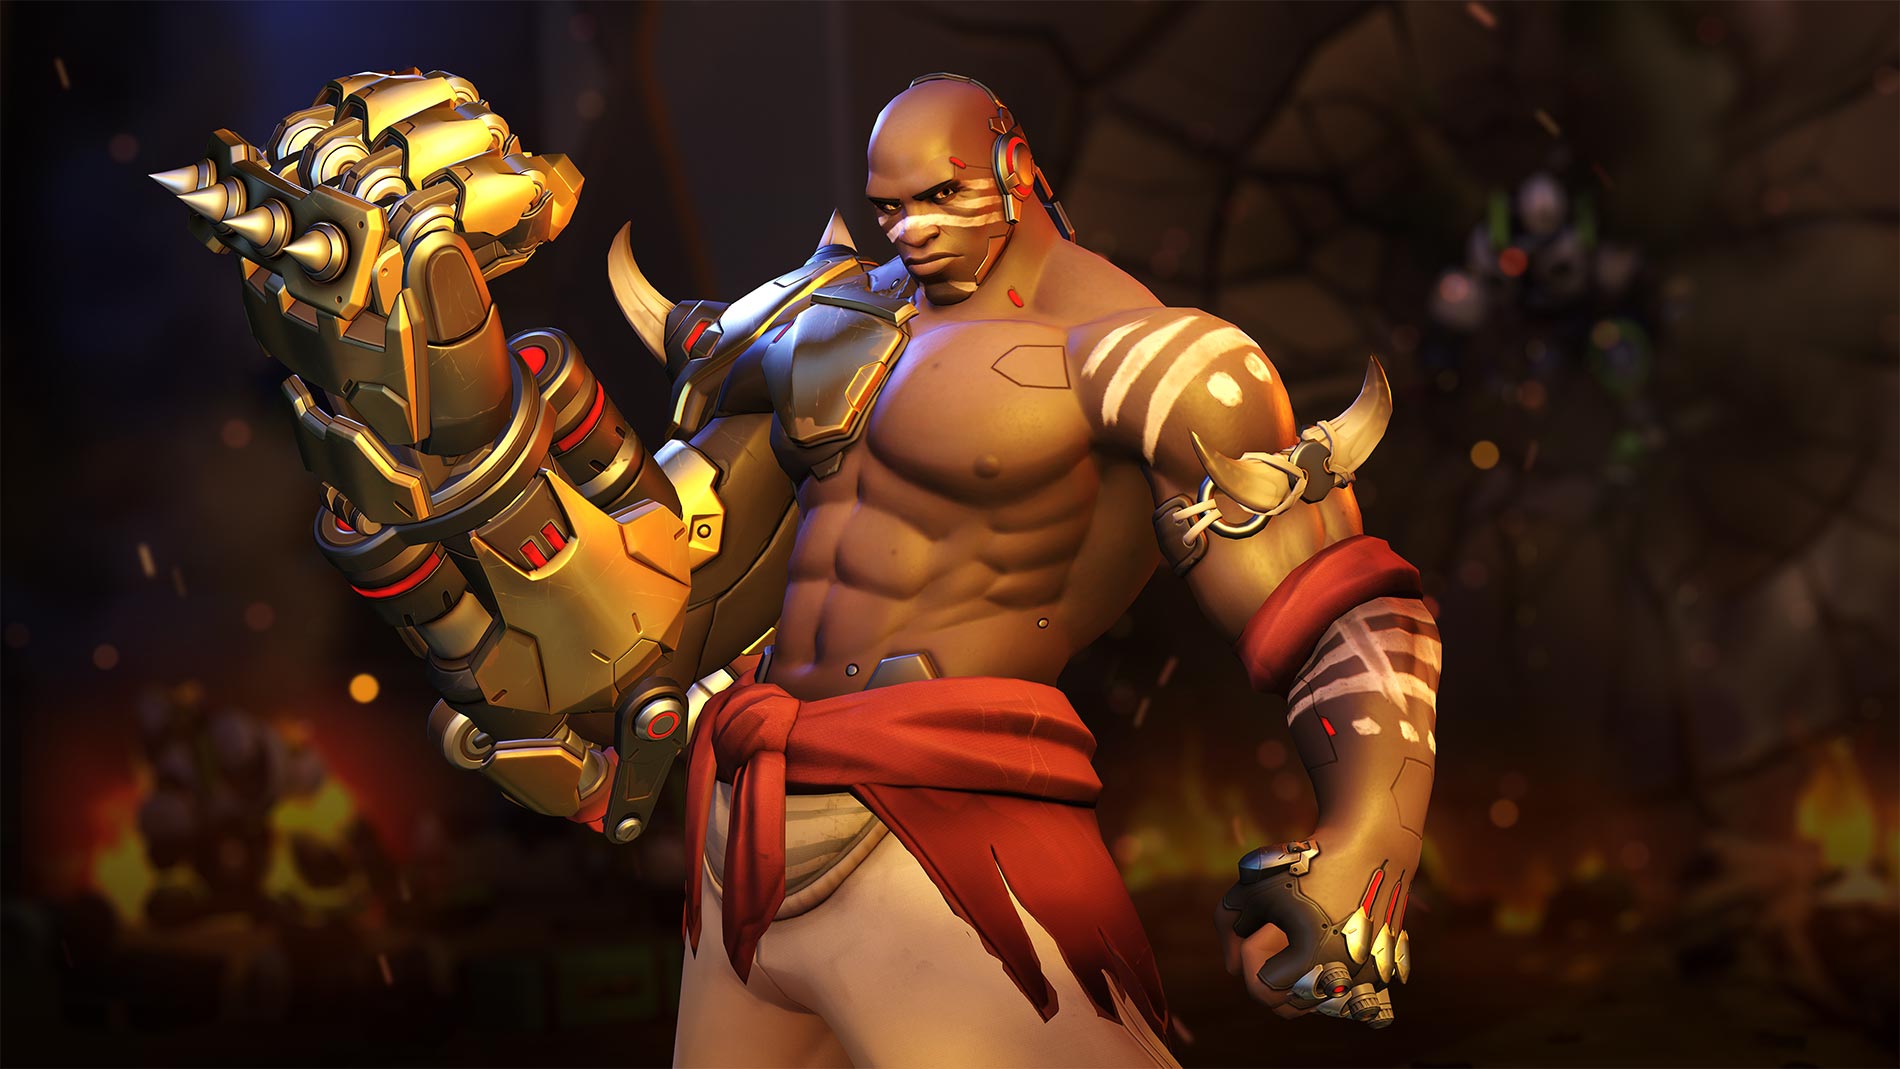 Doomfist is one of the heroes of Offensive Mode in Overwatch. (Image: Blizzard)